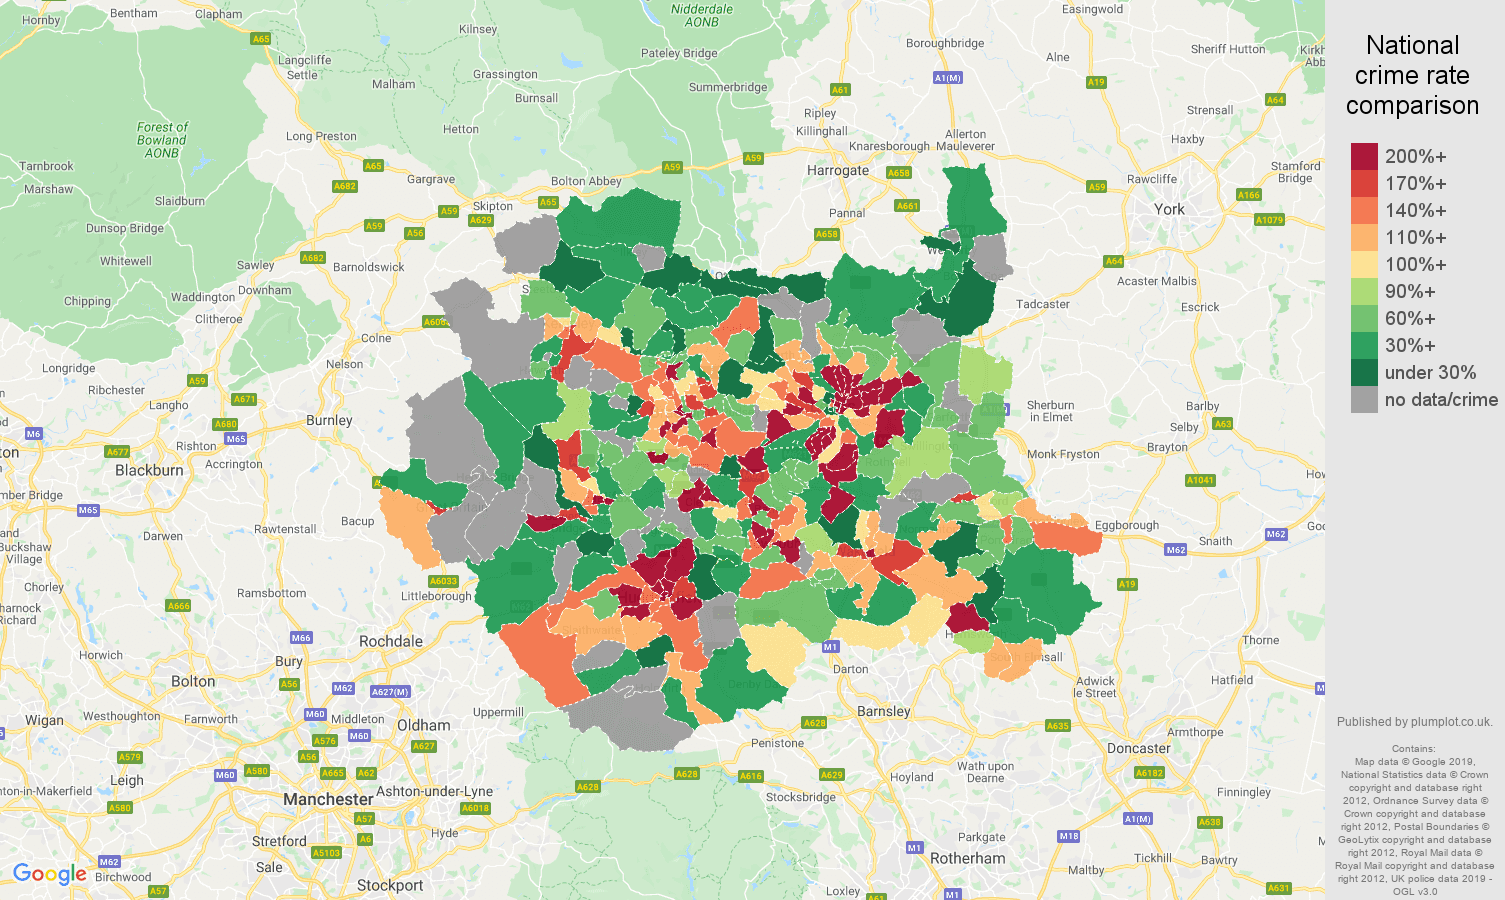 West Yorkshire possession of weapons crime rate comparison map